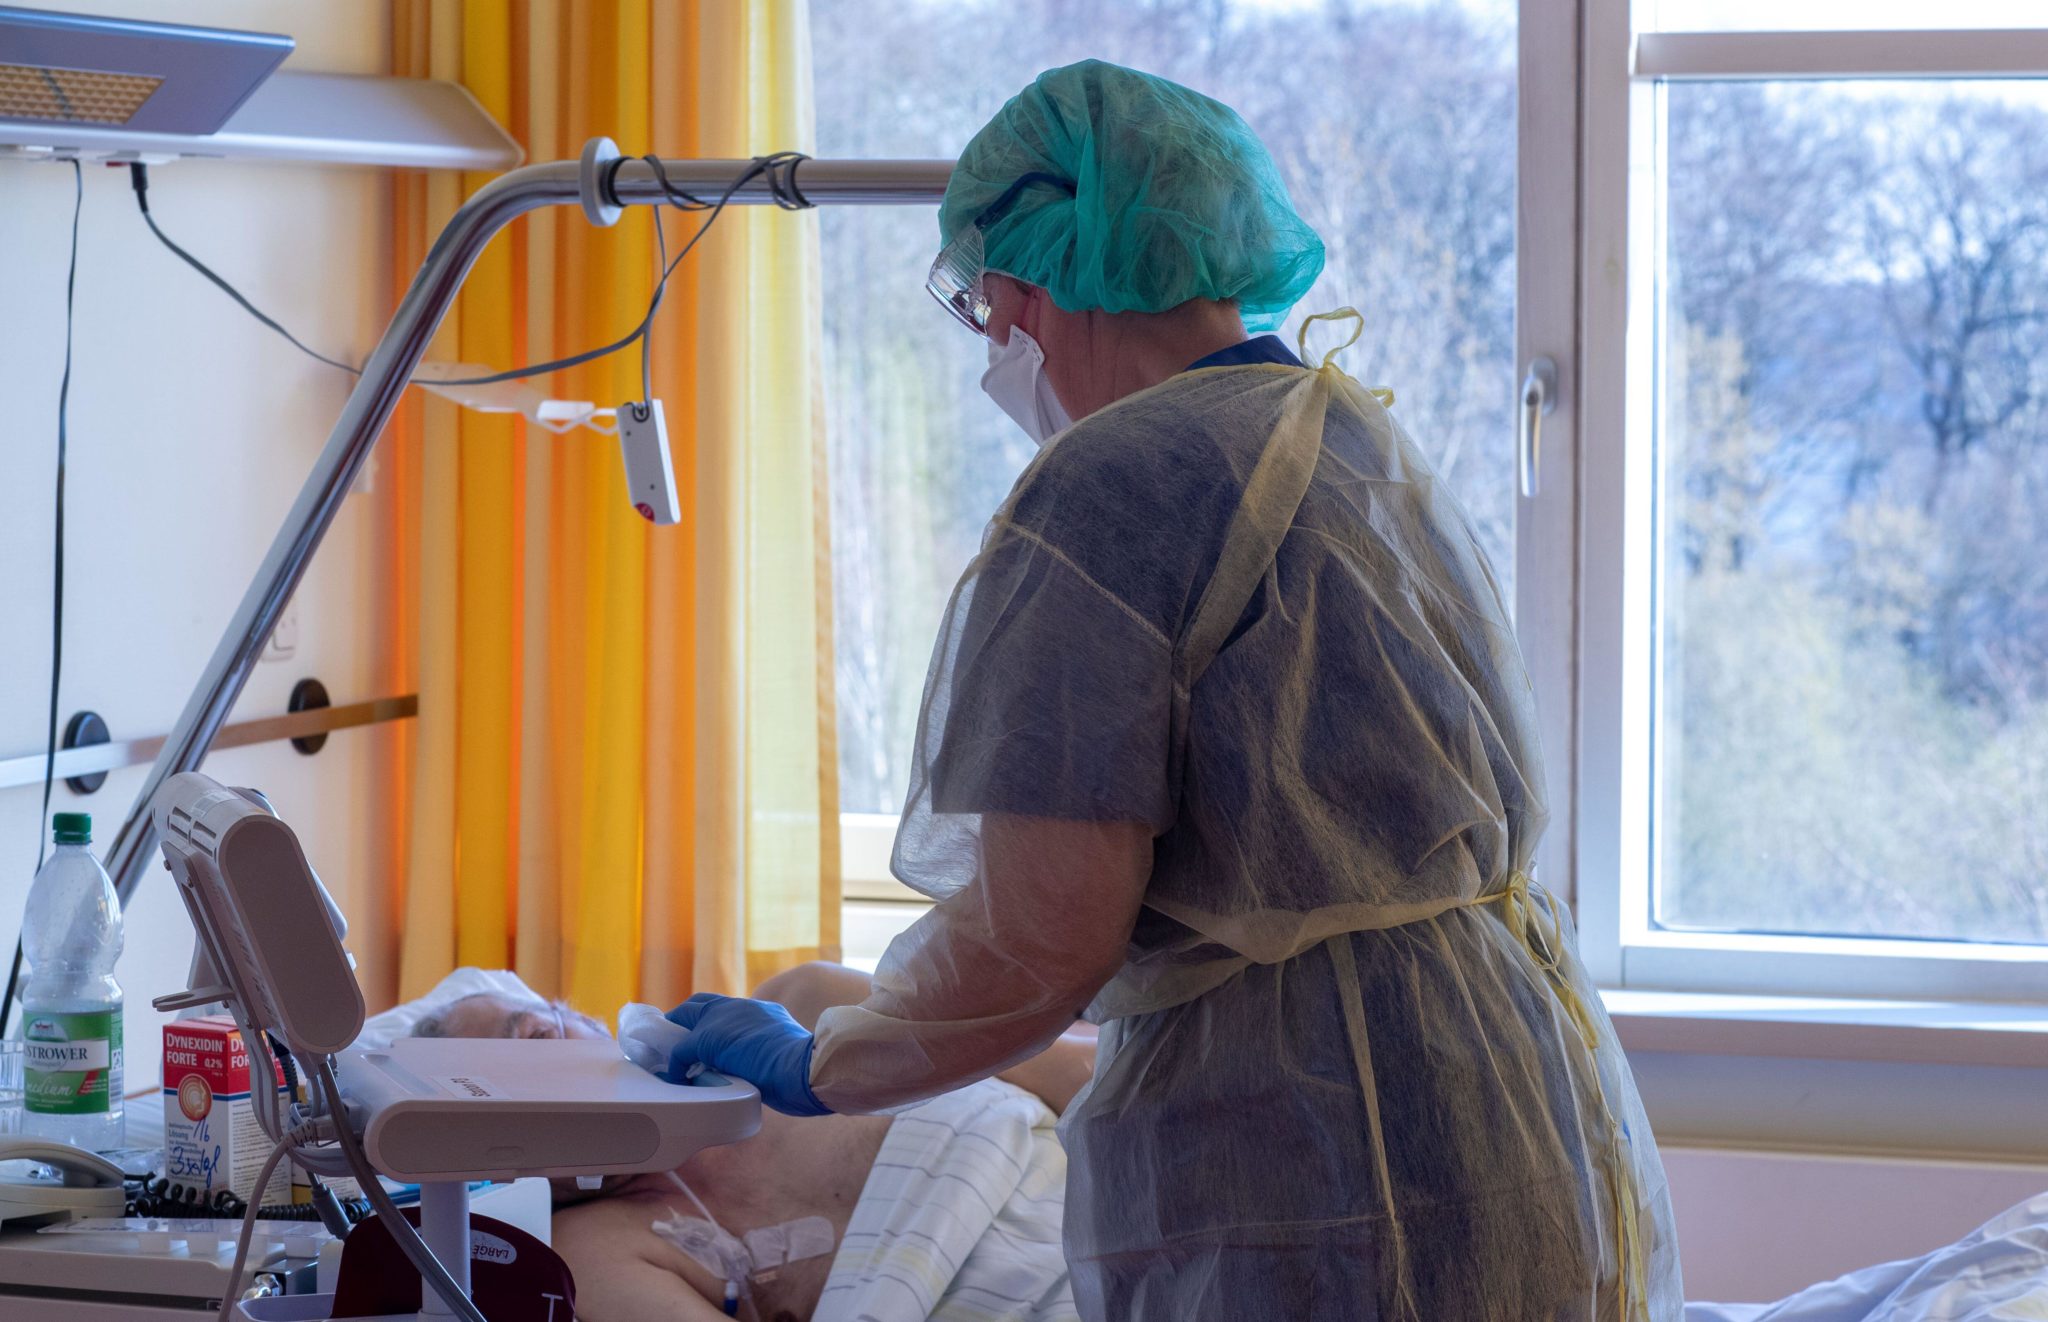 A nurse talks to a patient in the isolation ward for coronavirus treatments in a hospital in Schwerin, Germany in March 2020.